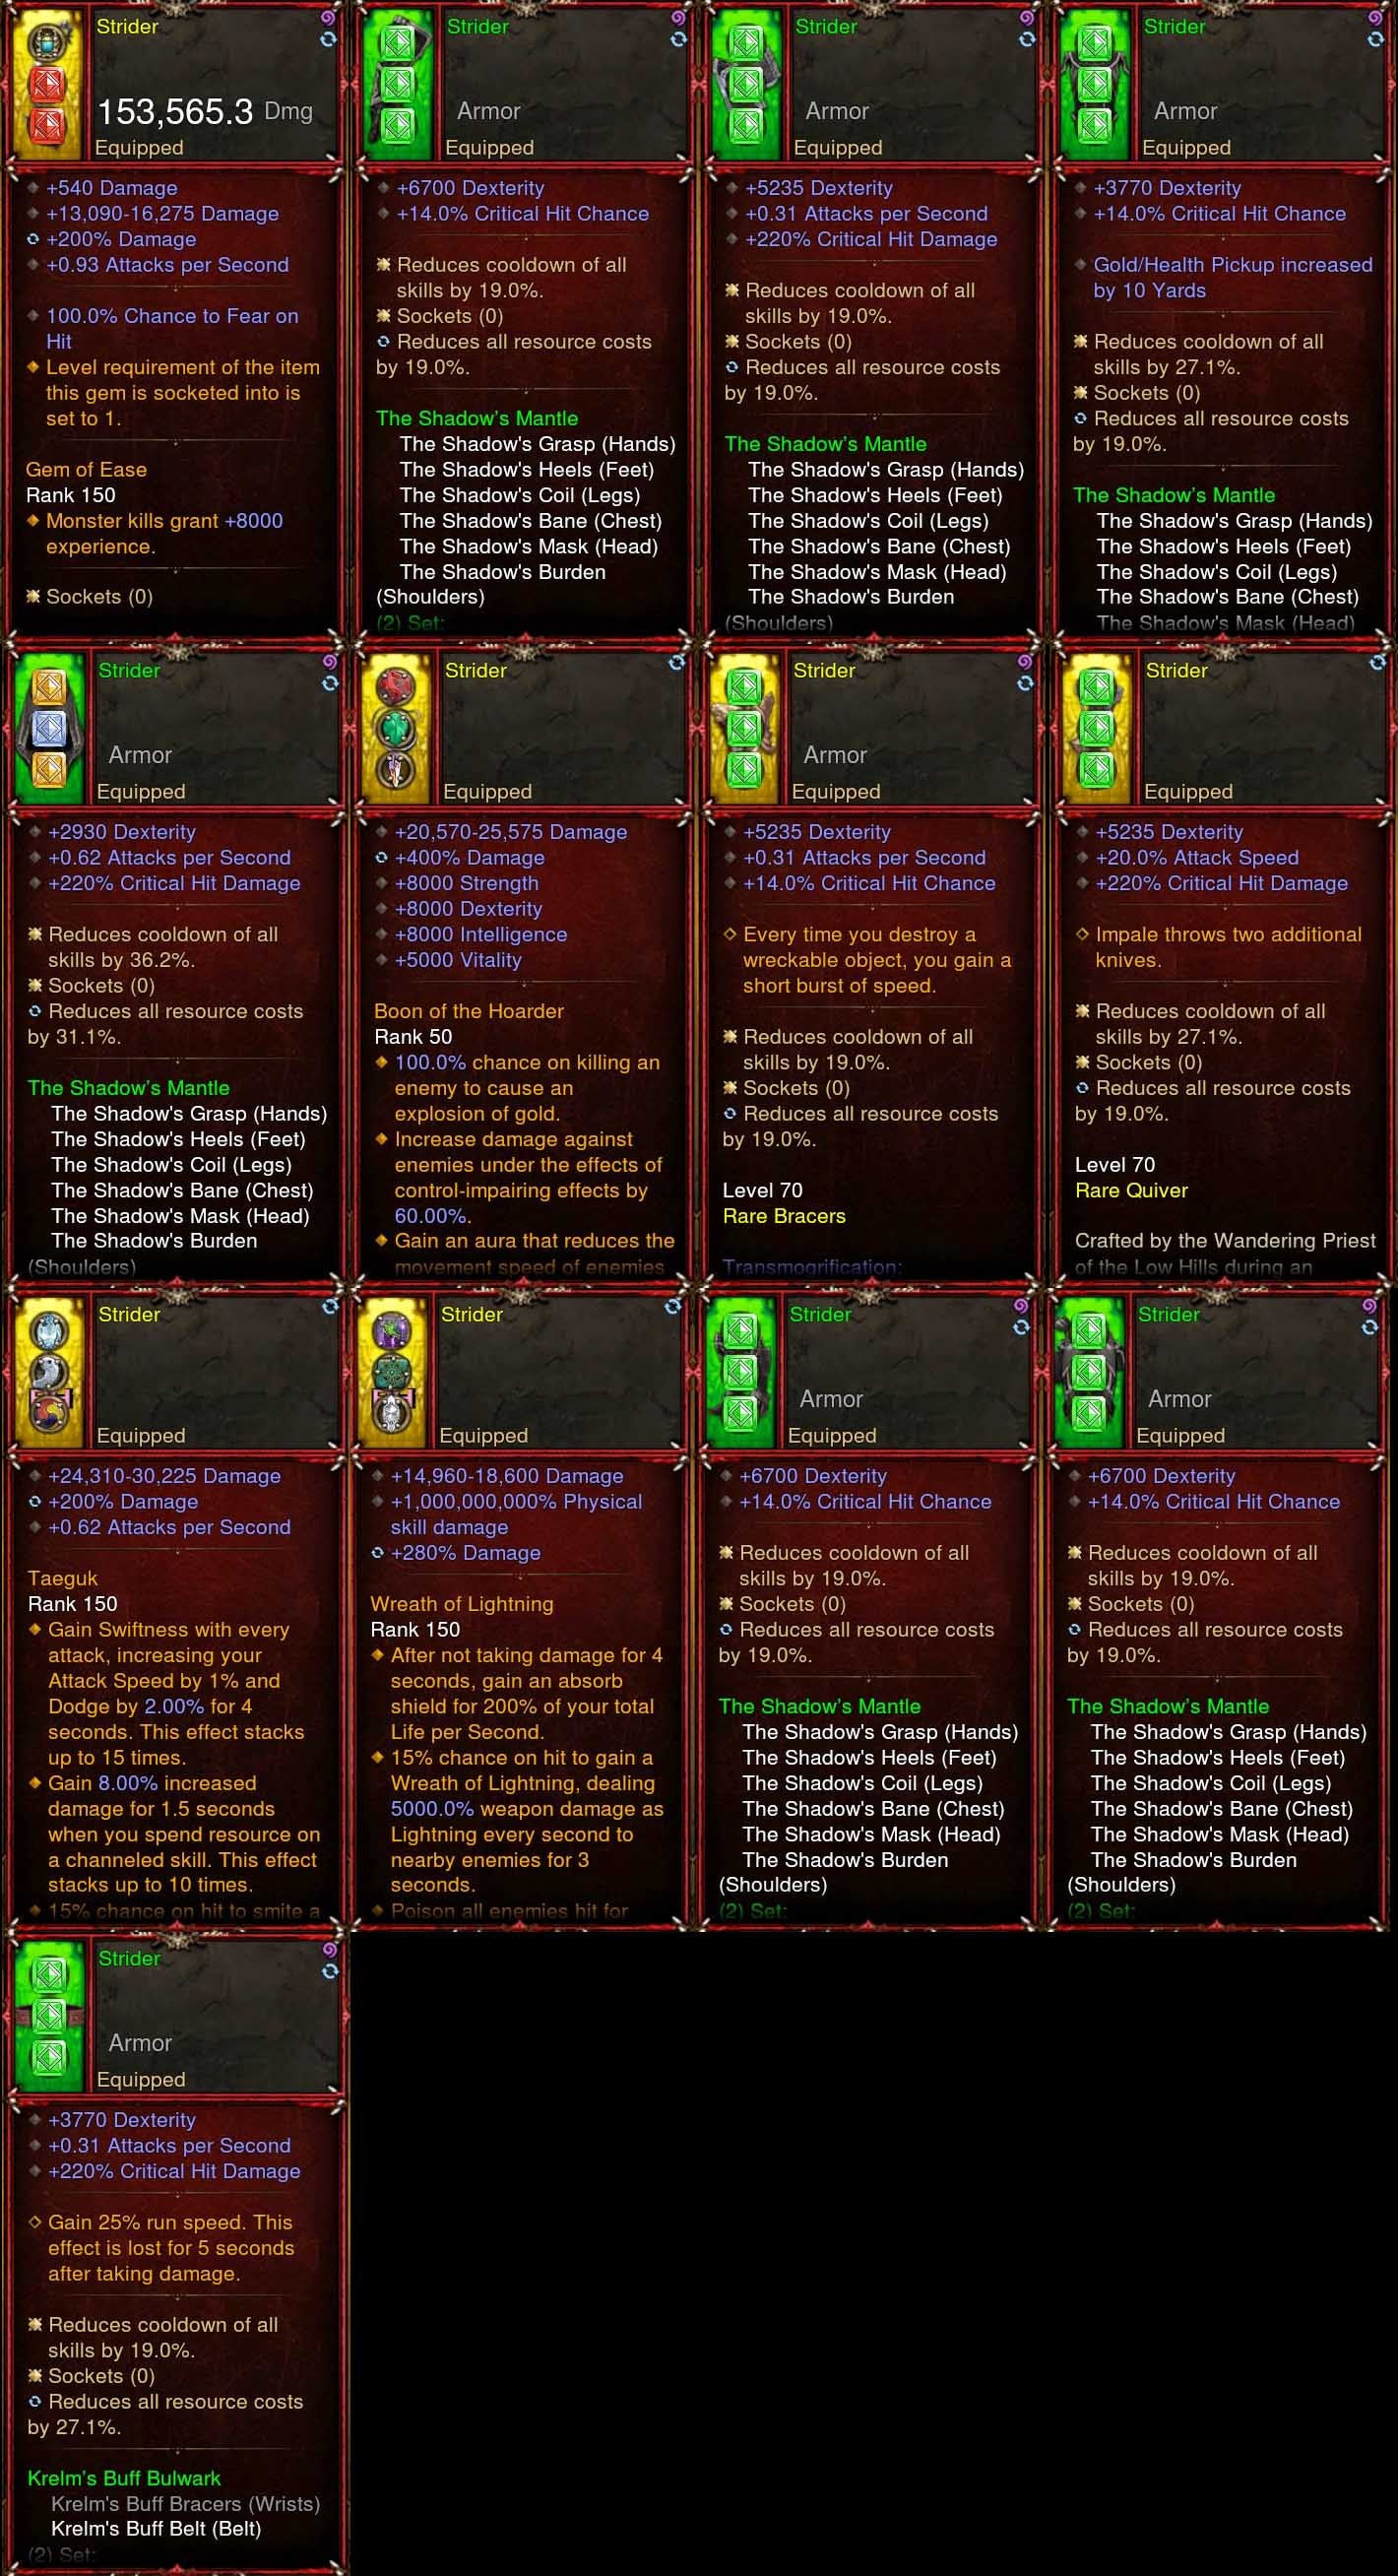 [Primal Ancient] Diablo 3 Immortal v5 Type-R Speed Strafe Demon Hunter Strider Diablo 3 Mods ROS Seasonal and Non Seasonal Save Mod - Modded Items and Gear - Hacks - Cheats - Trainers for Playstation 4 - Playstation 5 - Nintendo Switch - Xbox One